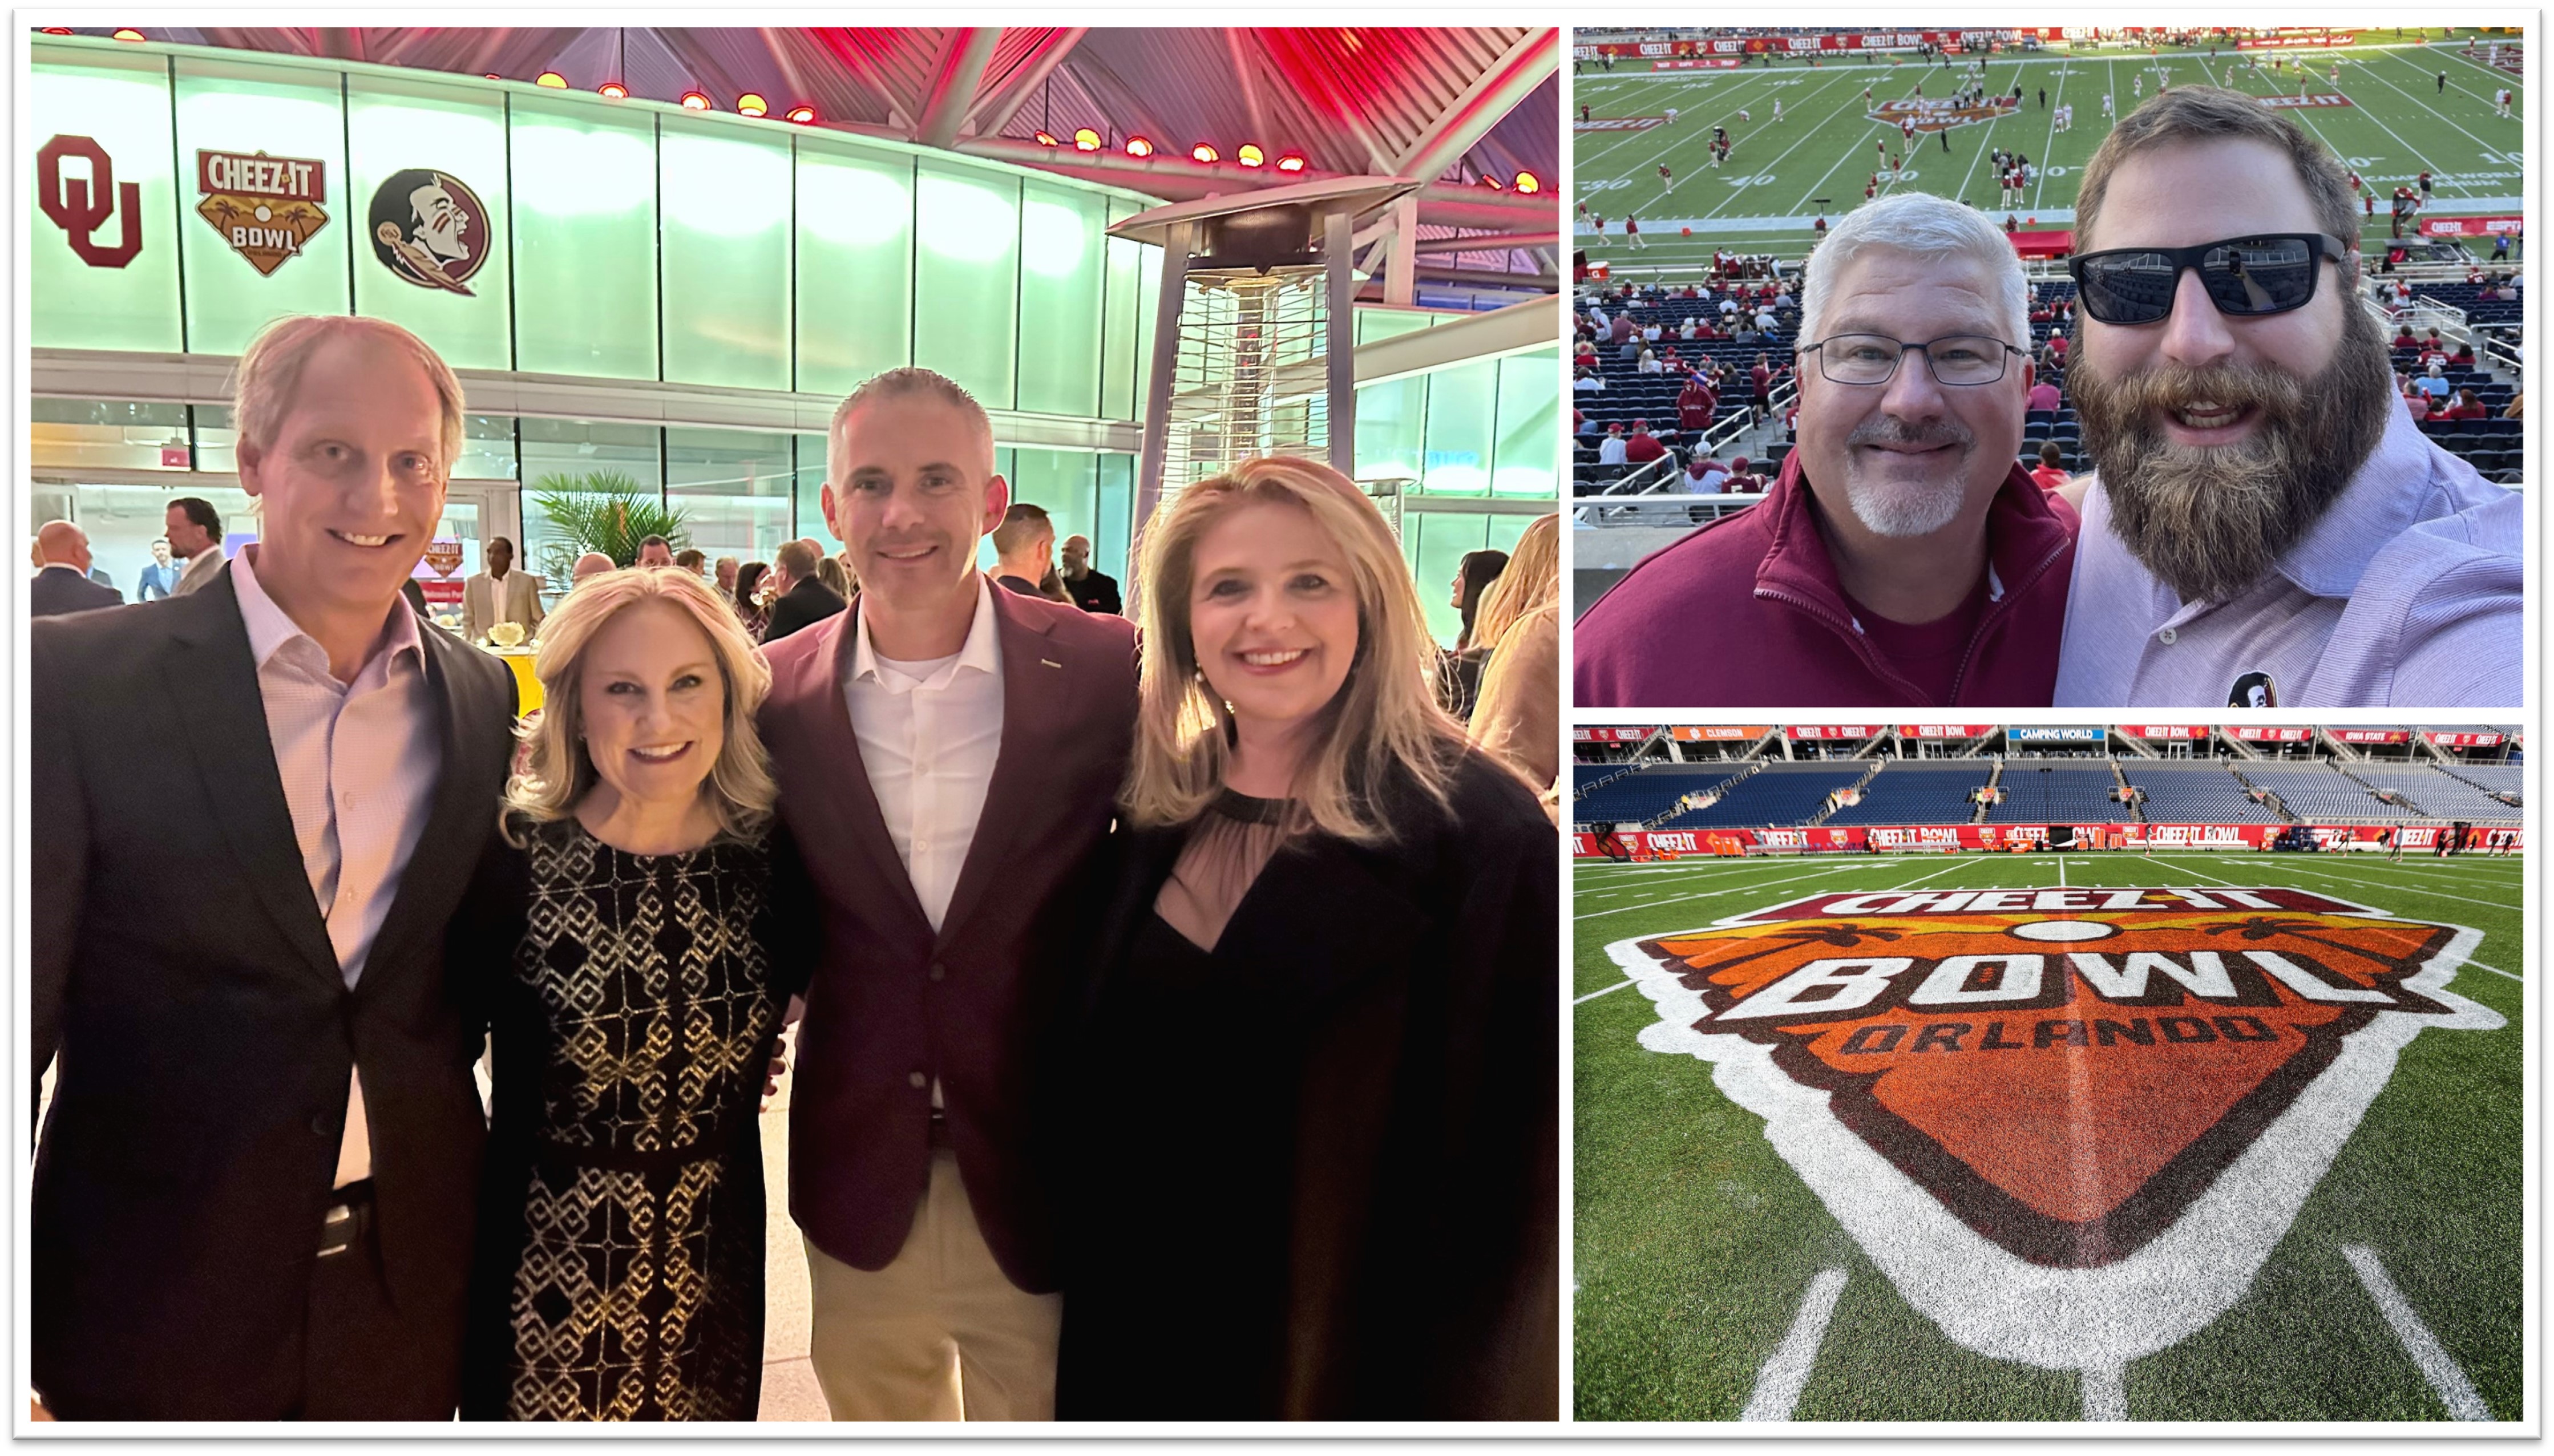 Casandra Matej, Visit Orlando President & CEO, pictured with Brian Comes and other attendees at the 2022 Cheez-It Bowl game. 